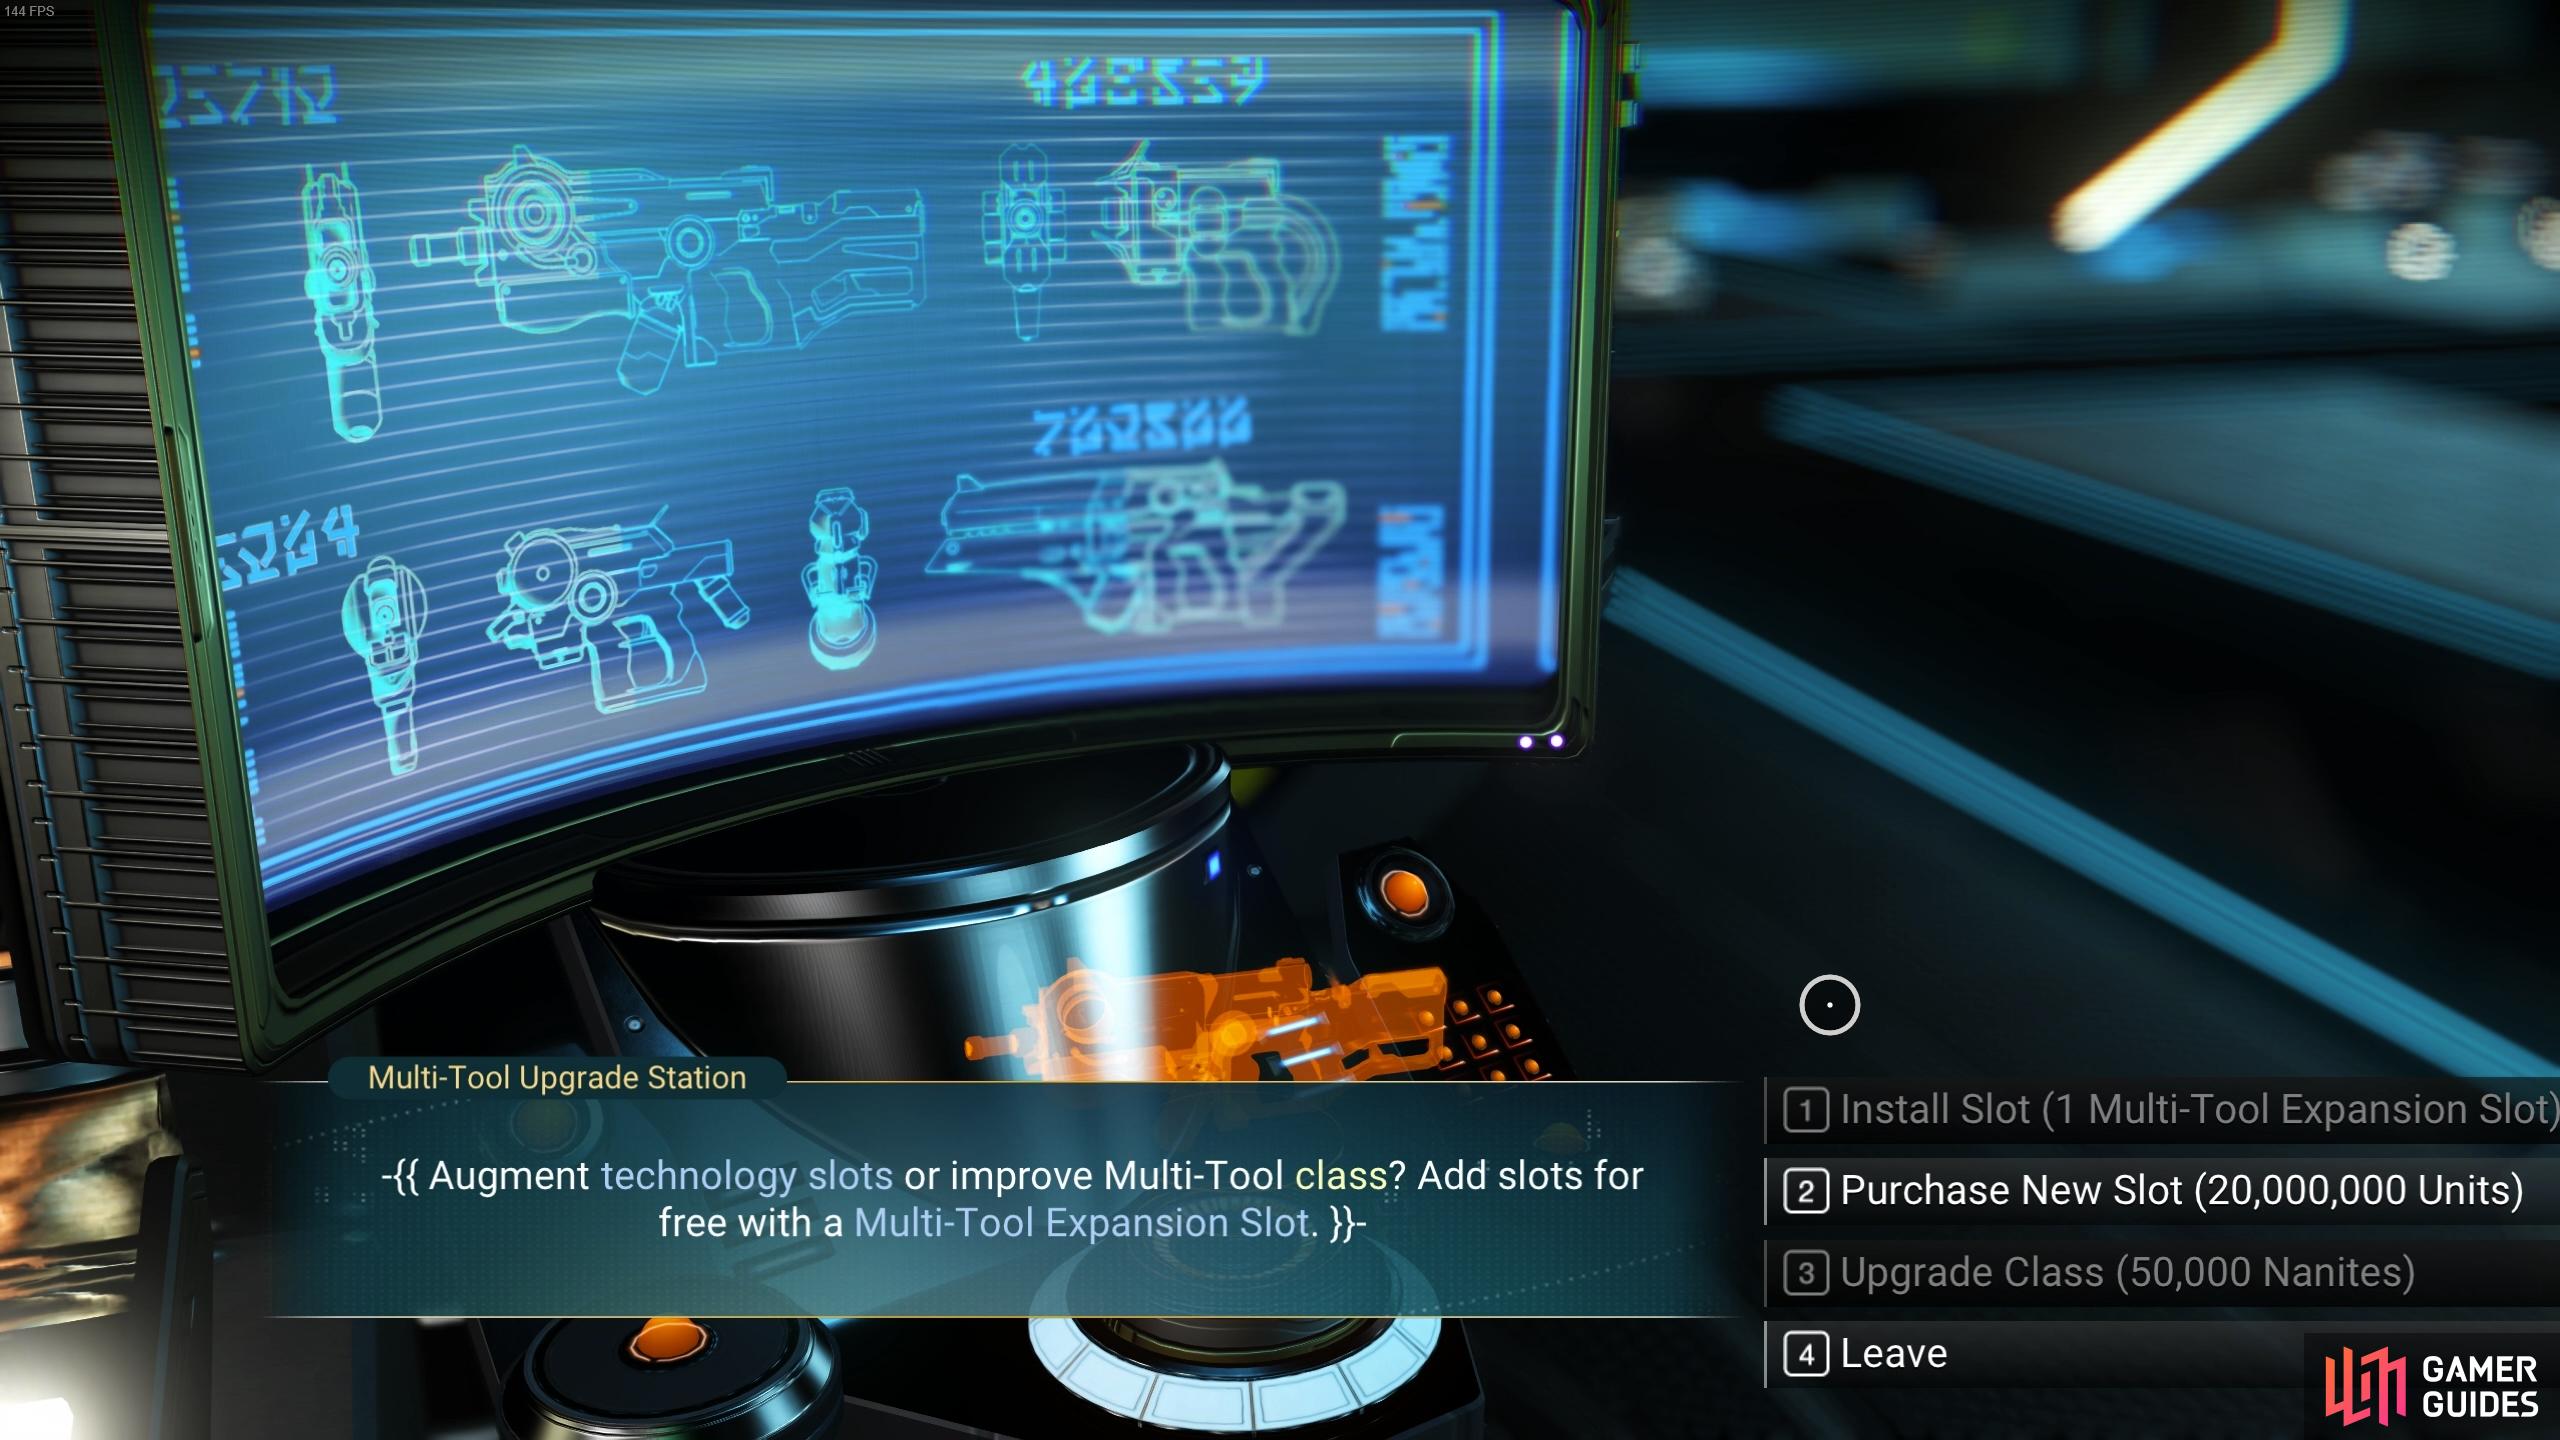 You can purchase inventory slots or class tier upgrades from the Multi-Tool Upgrade station on space stations.